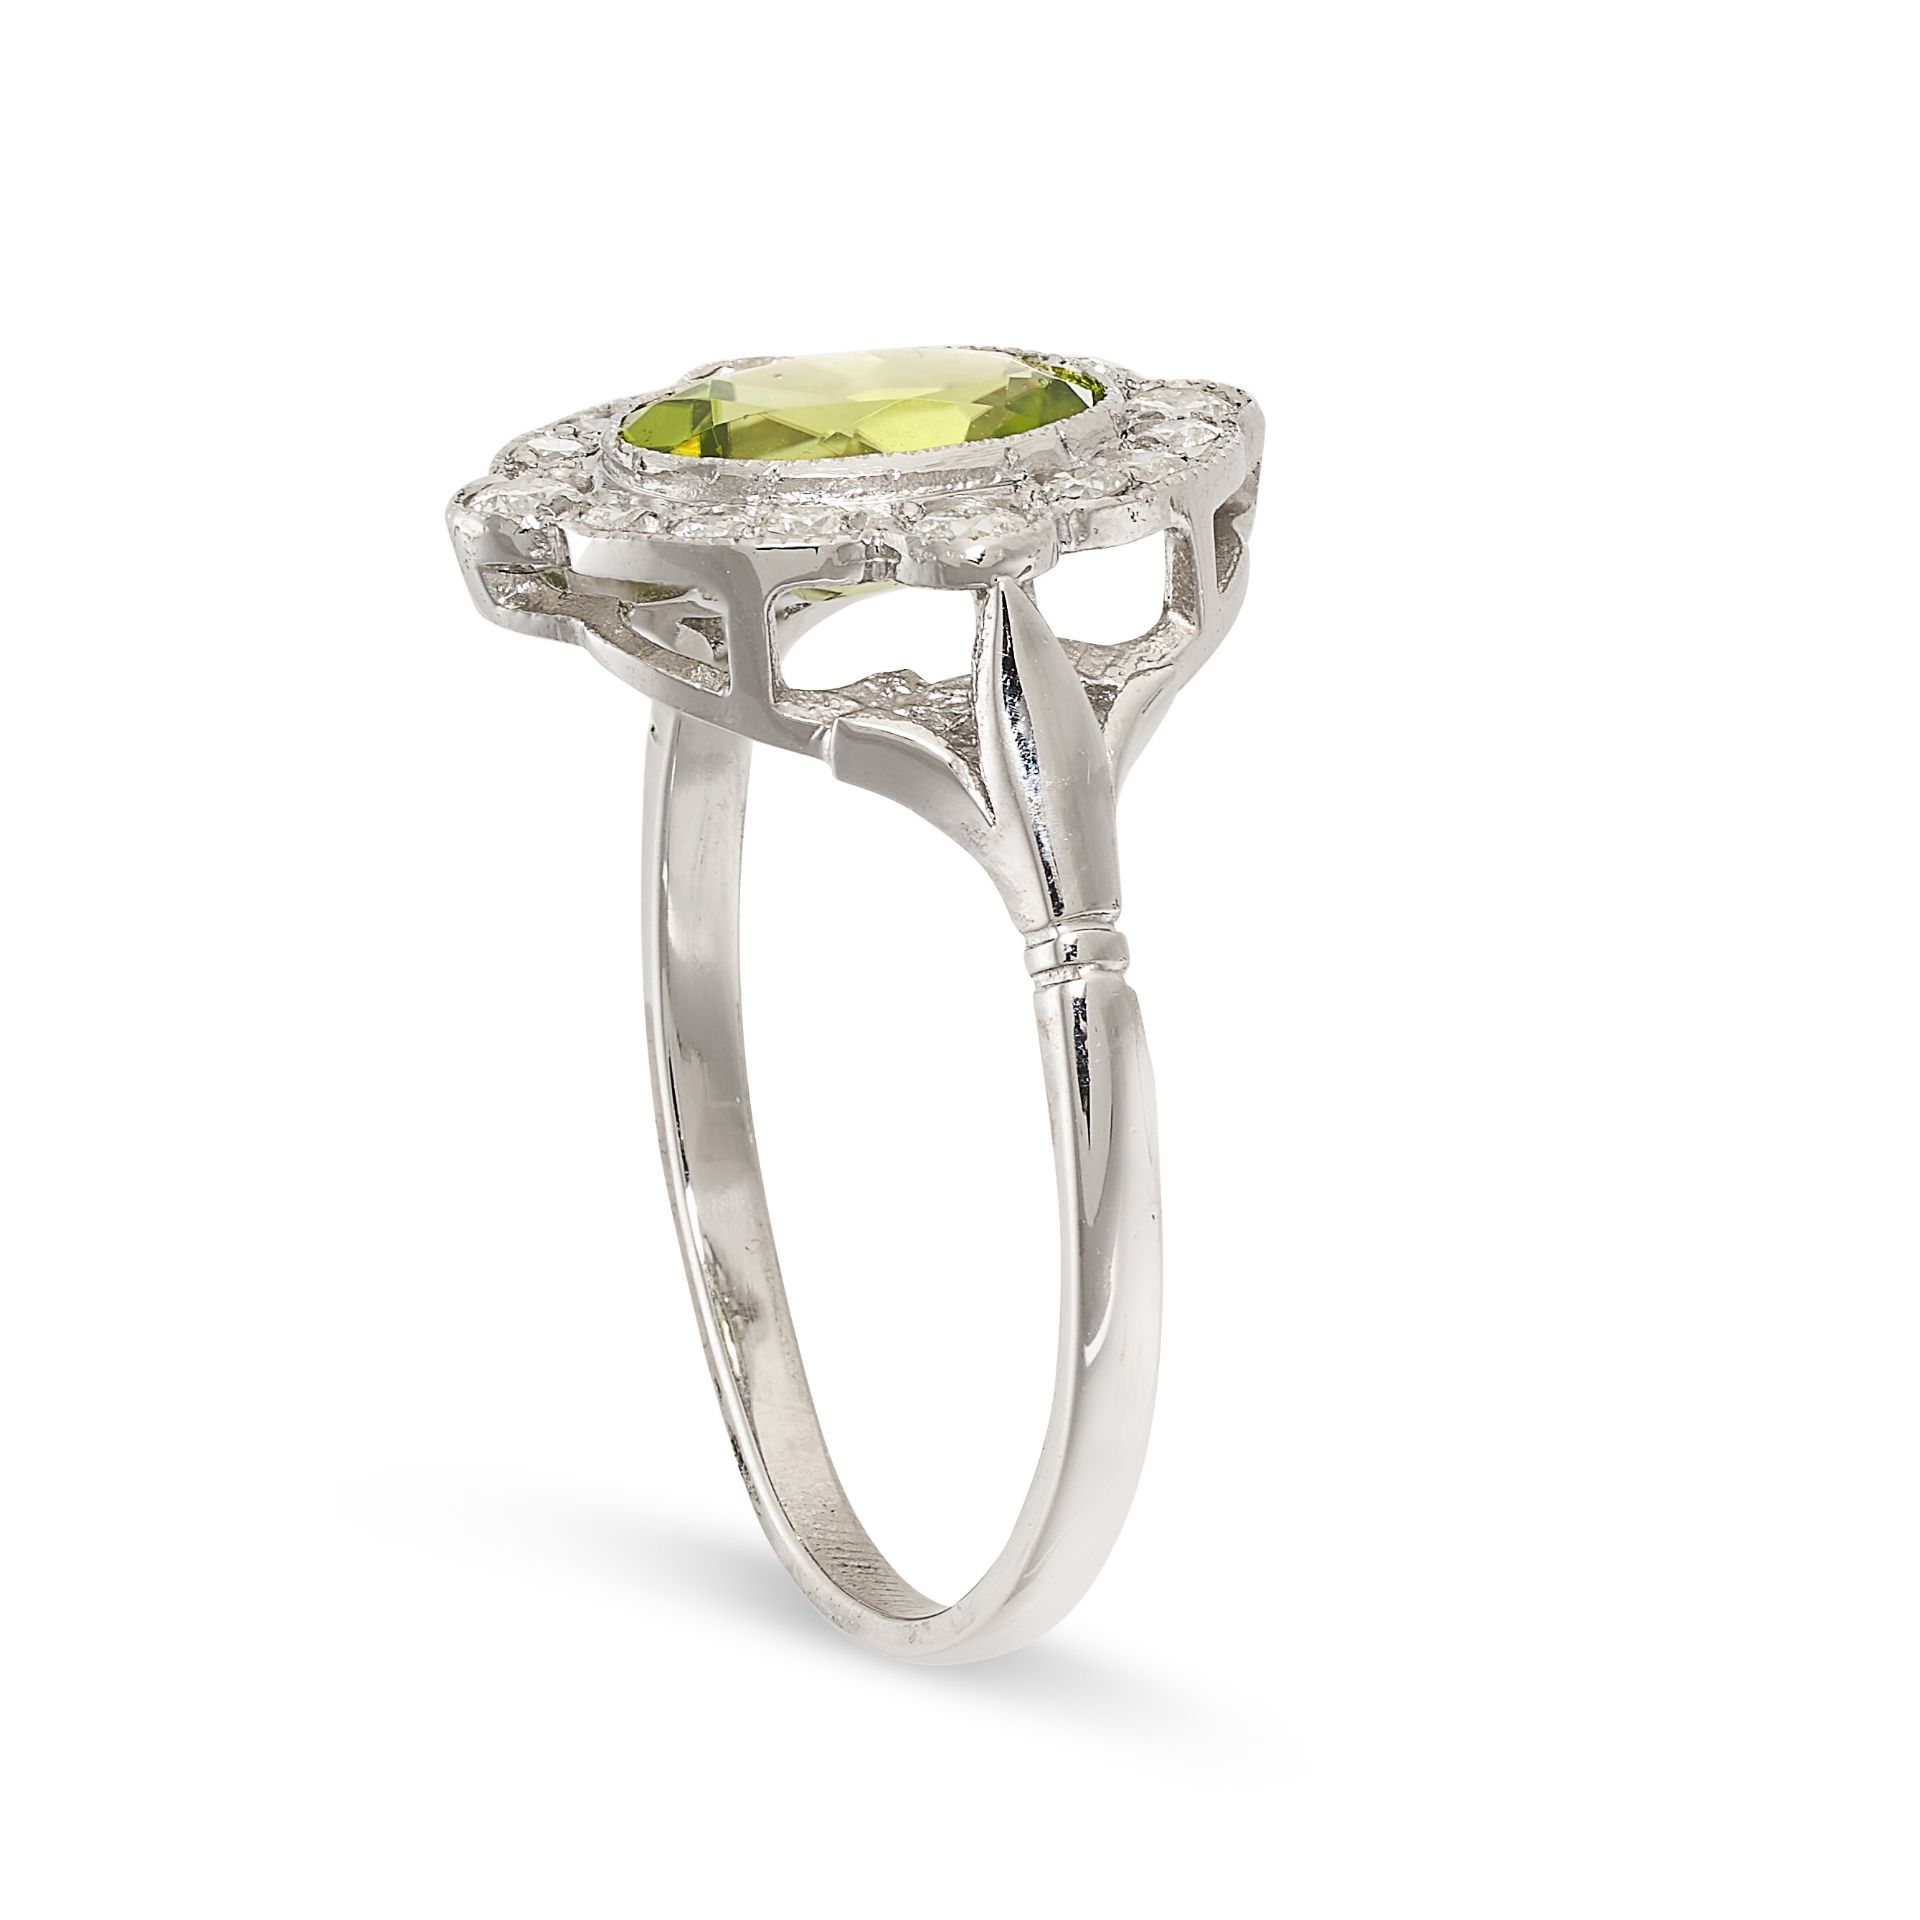 A PERIDOT AND DIAMOND CLUSTER DRESS RING in platinum, set with an oval cut peridot within a border - Image 2 of 2